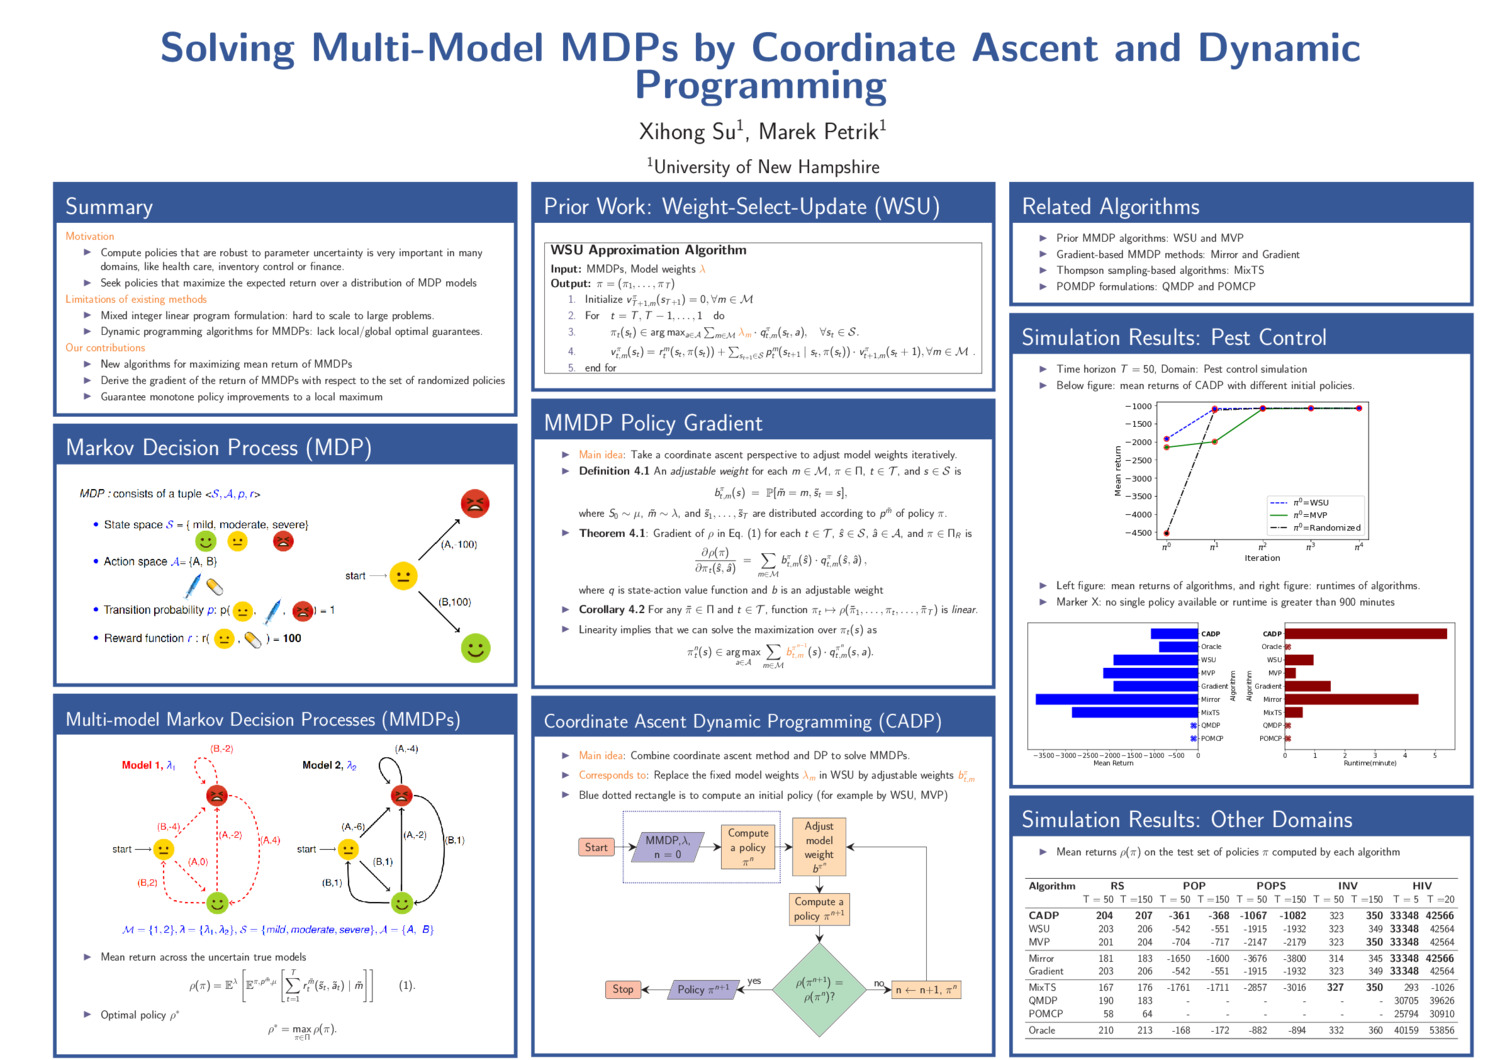 Solving Multi-Model Mdps By Coordinate Ascent And Dynamic Programming by xs1004